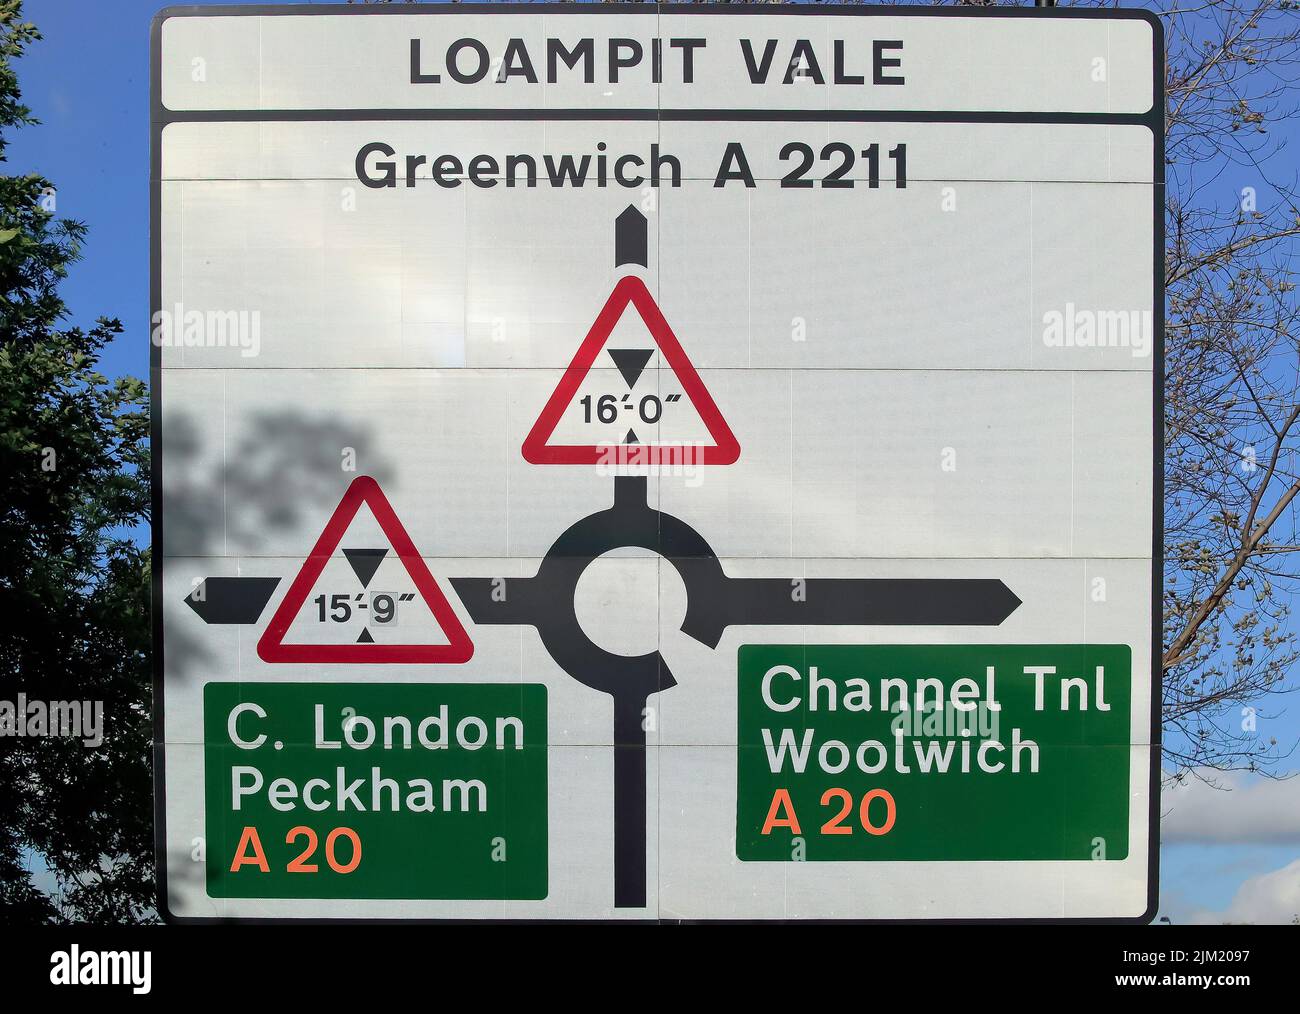 Close-up of a Road Sign, on Molesworth Street, looking towards Loampit Vale, Showing the old road layout at Lewisham Roundabout. Stock Photo